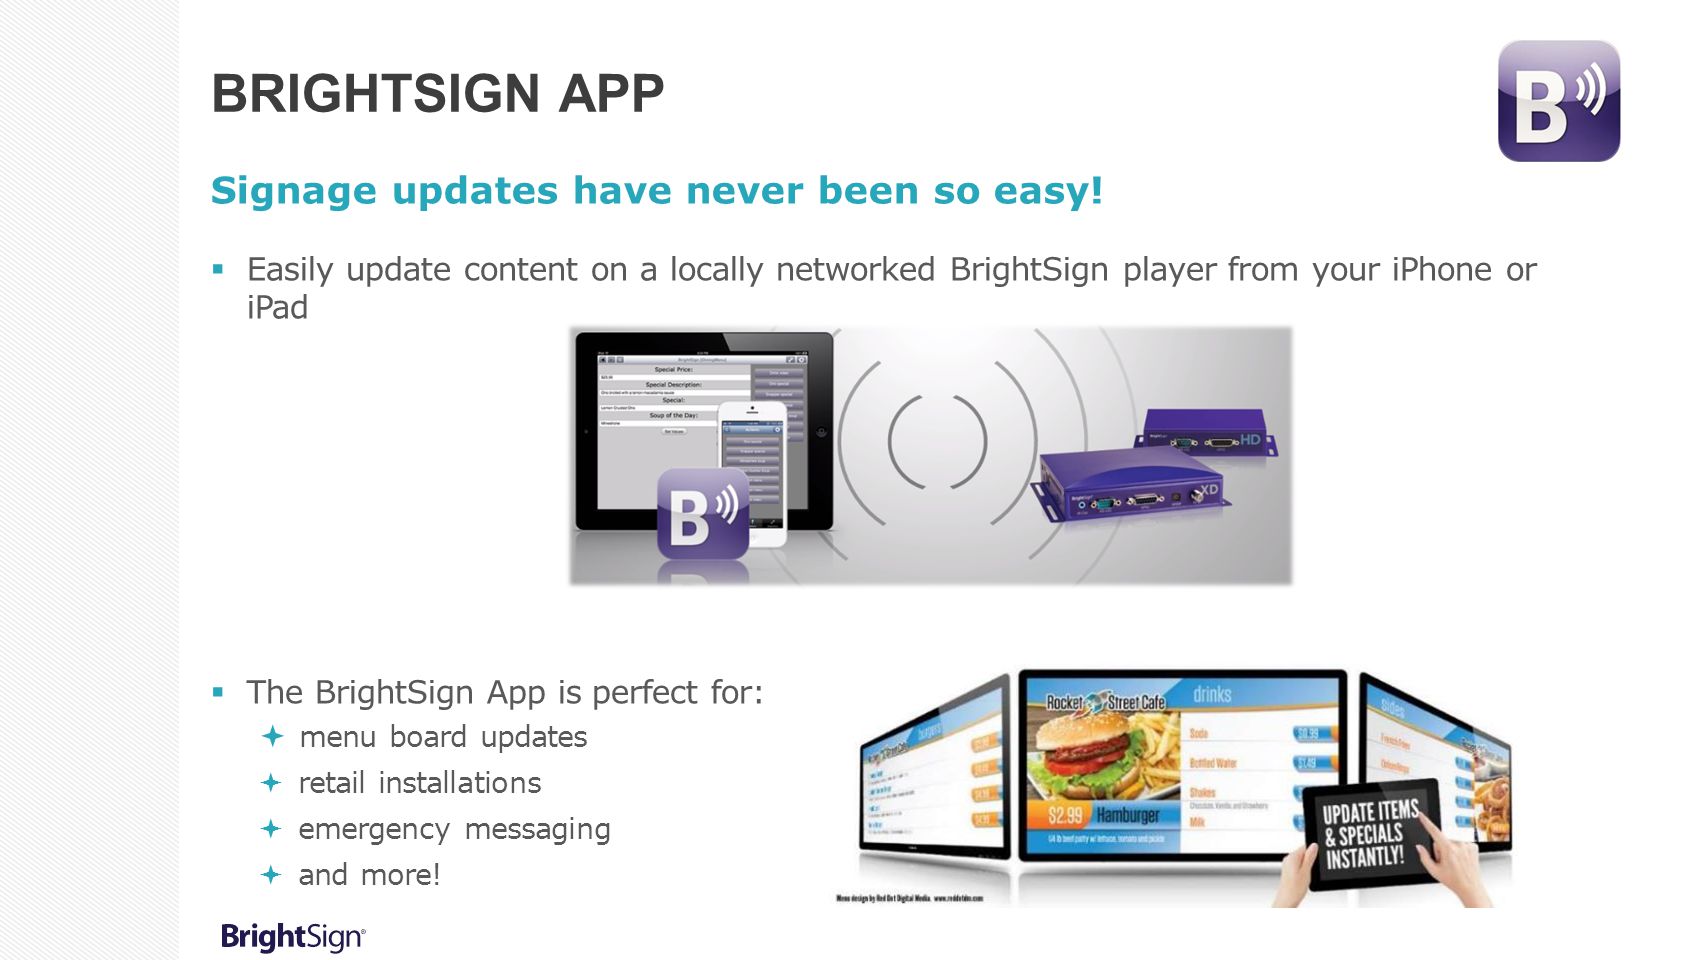 BrightSign App Signage updates have never been so easy!